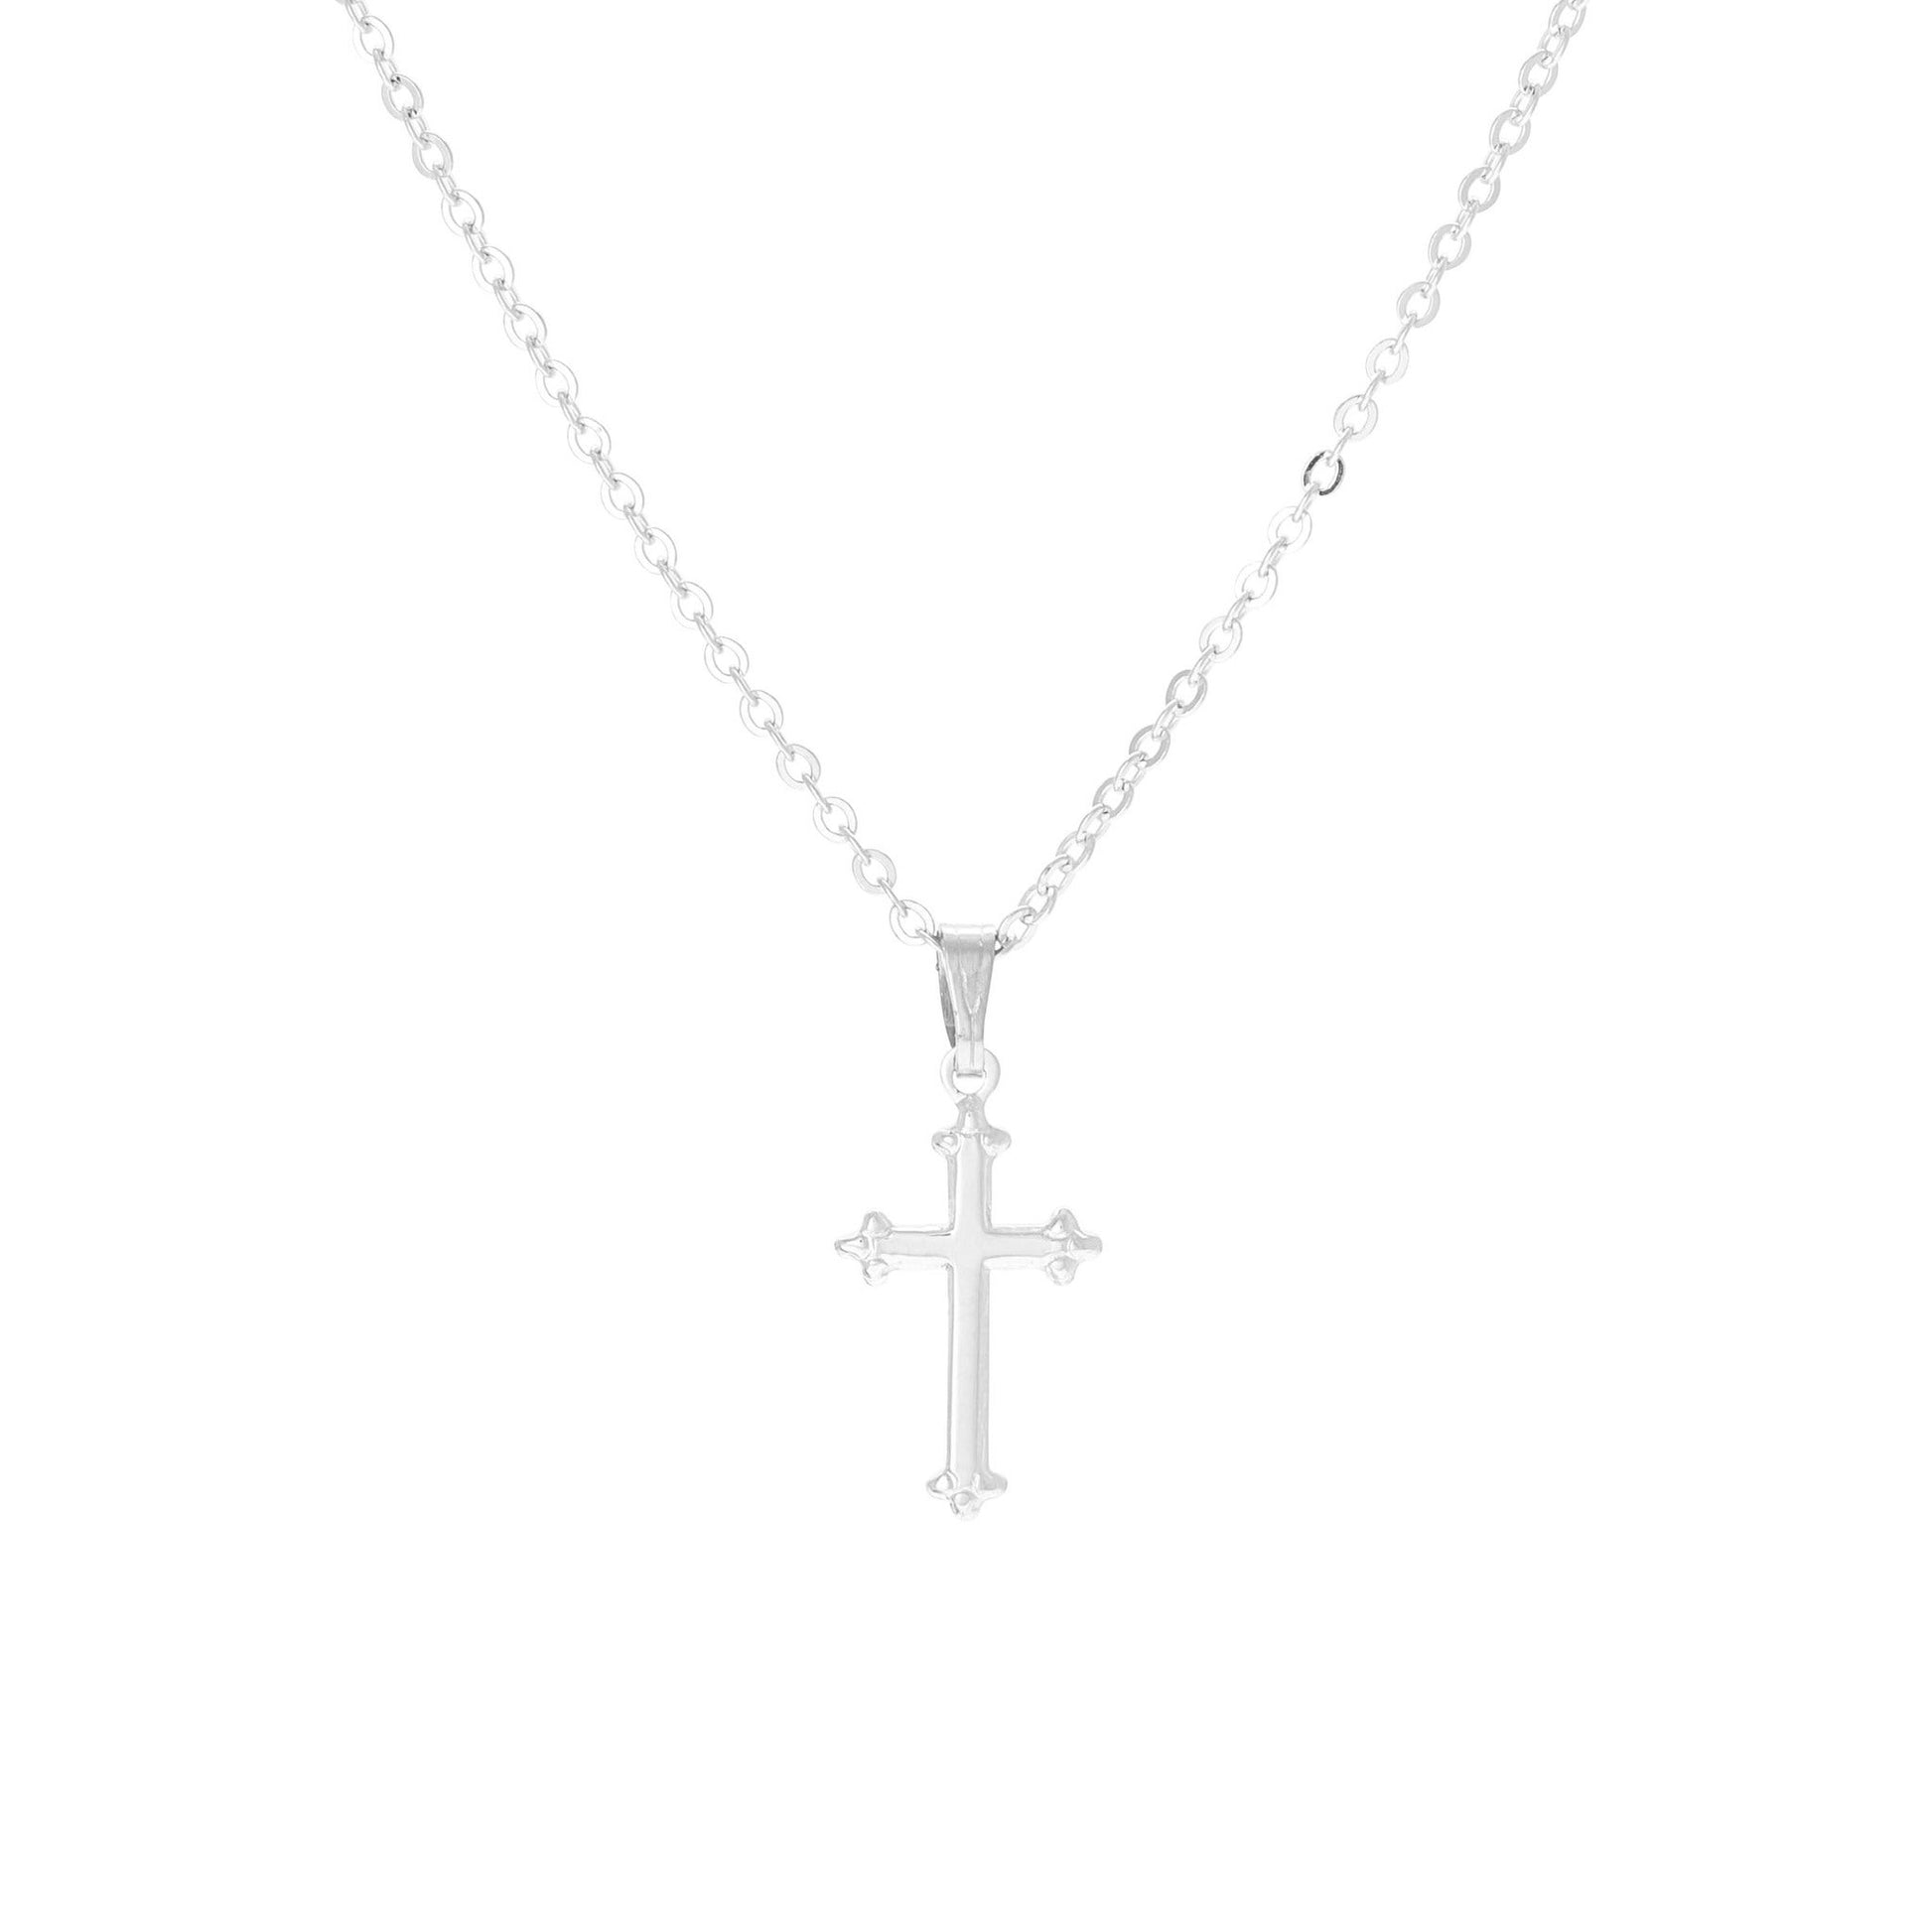 A small plain cross with beaded ends displayed on a neutral white background.